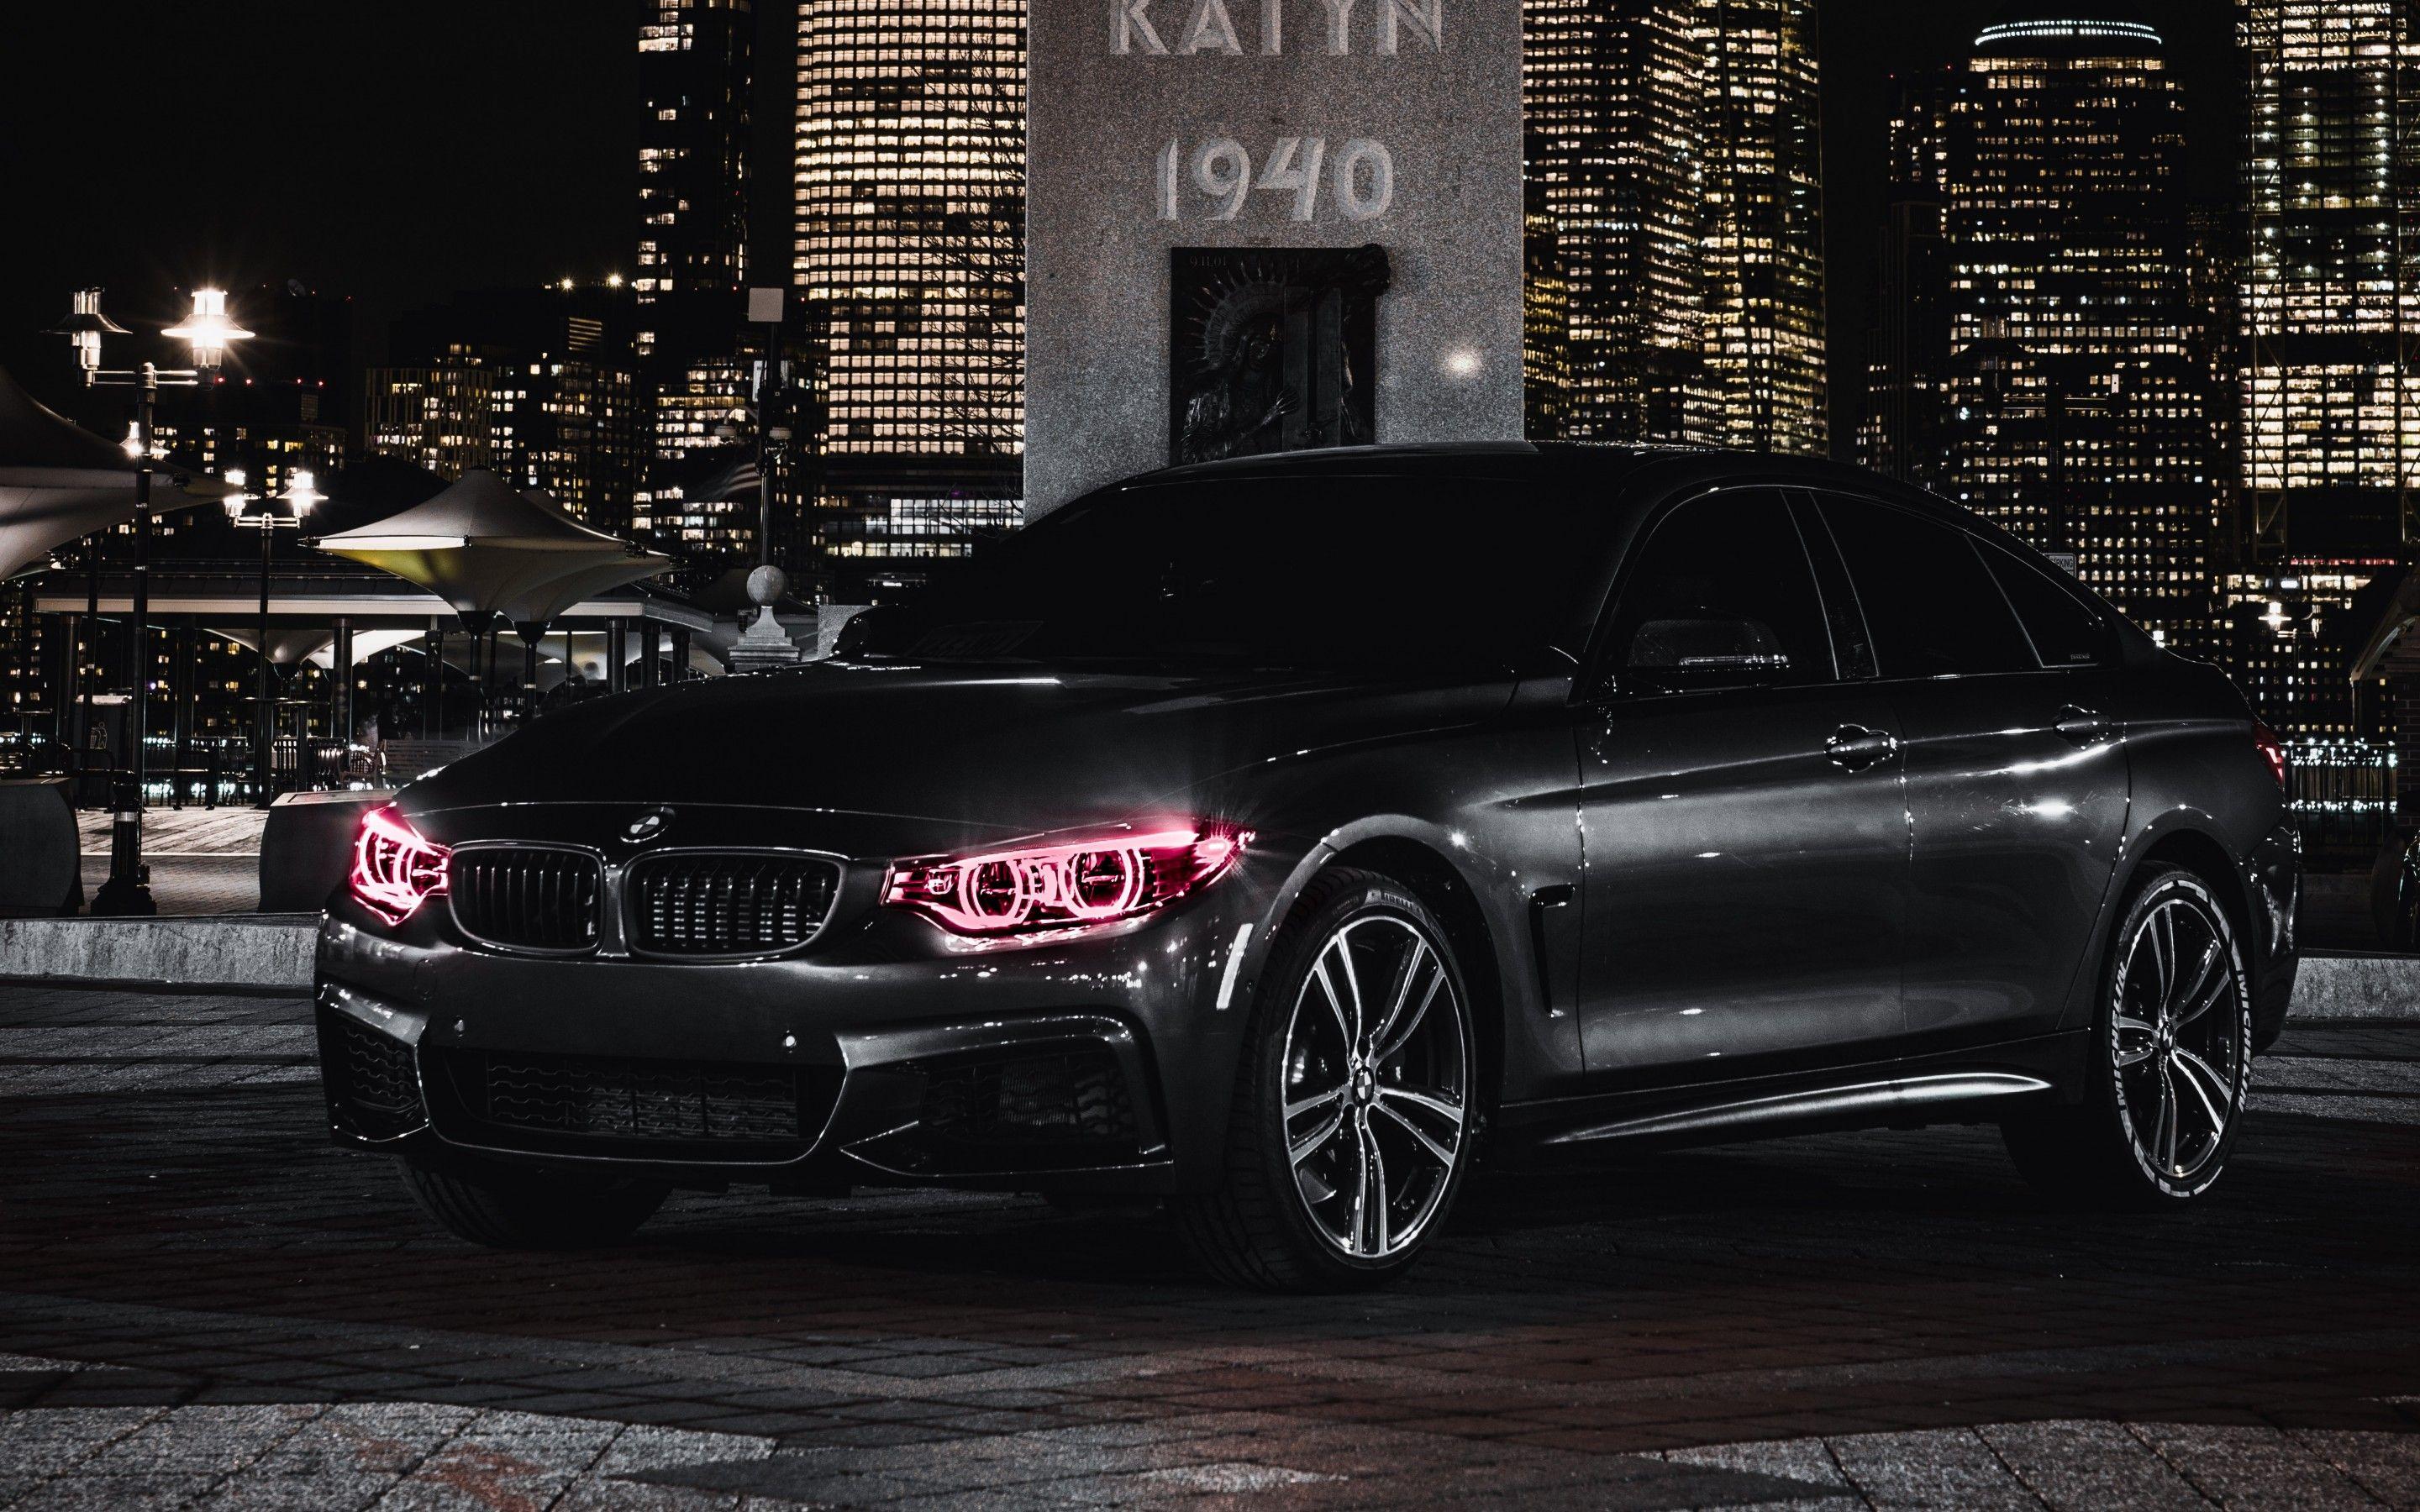 Bmw Night Wallpapers Top Free Bmw Night Backgrounds Wallpaperaccess